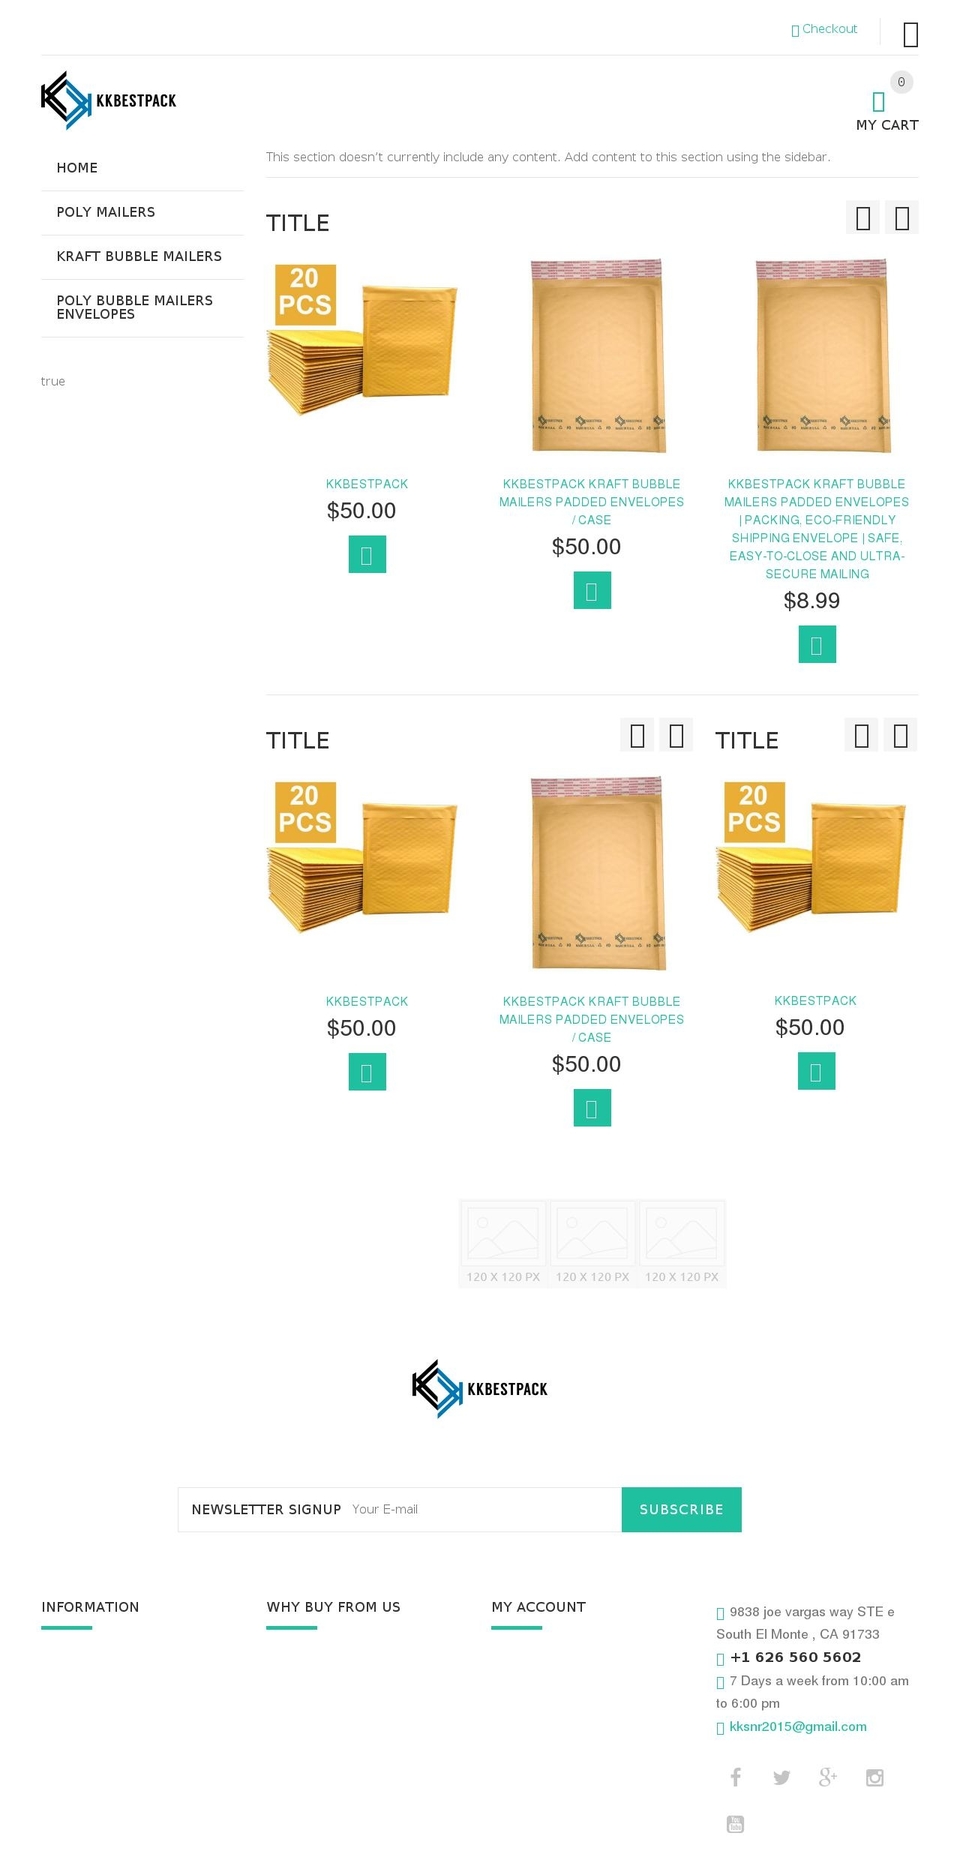 yourstore-v2-1-5 Shopify theme site example kkbestpack.com